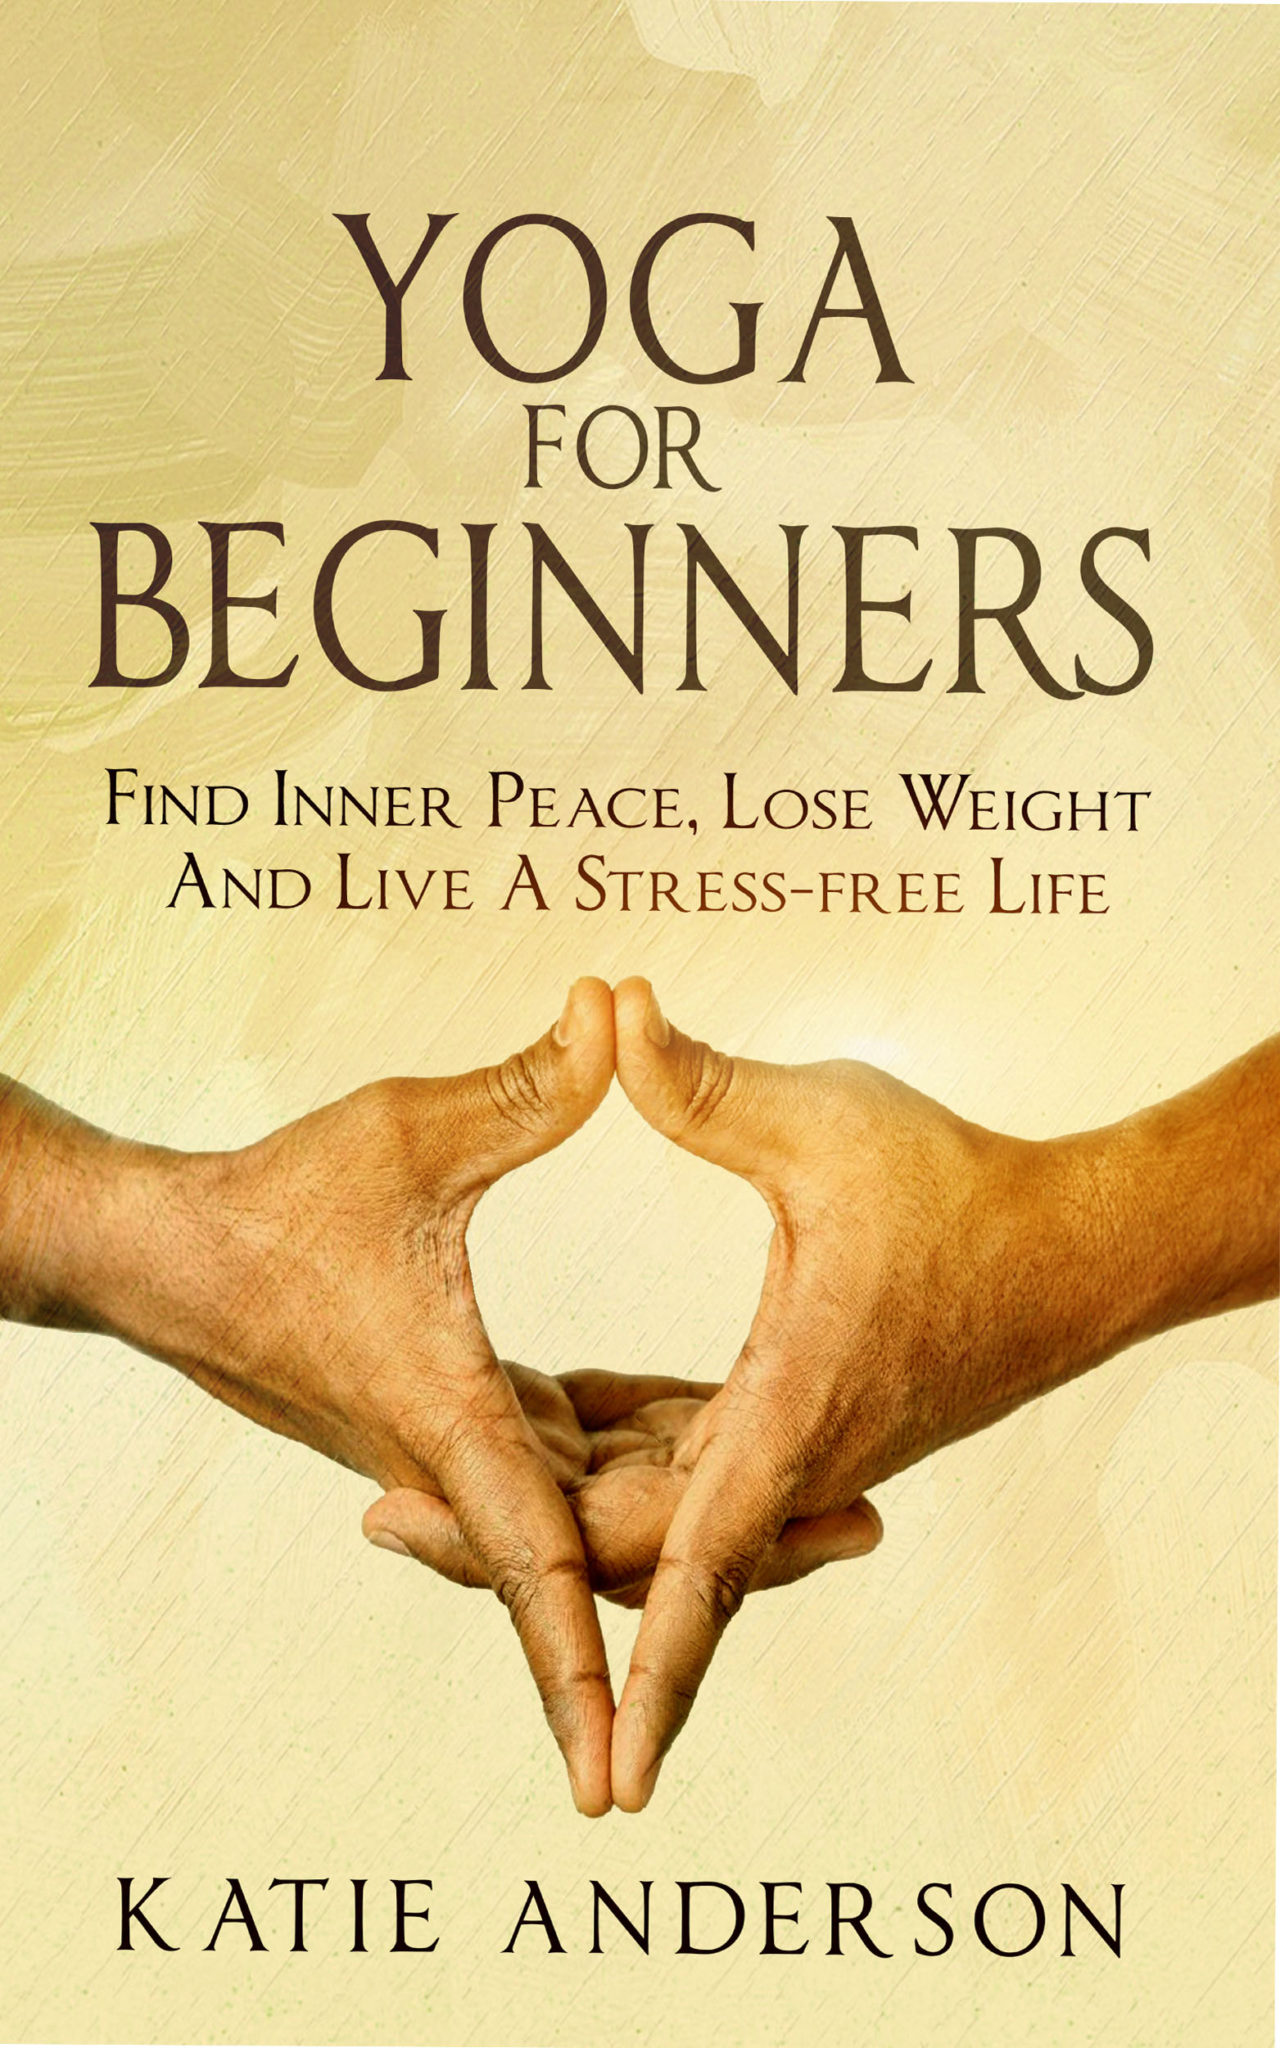 FREE: Yoga: Yoga For Beginners: Find Inner Peace, Lose Weight And Live A Stress-Free Life by Katie Anderson